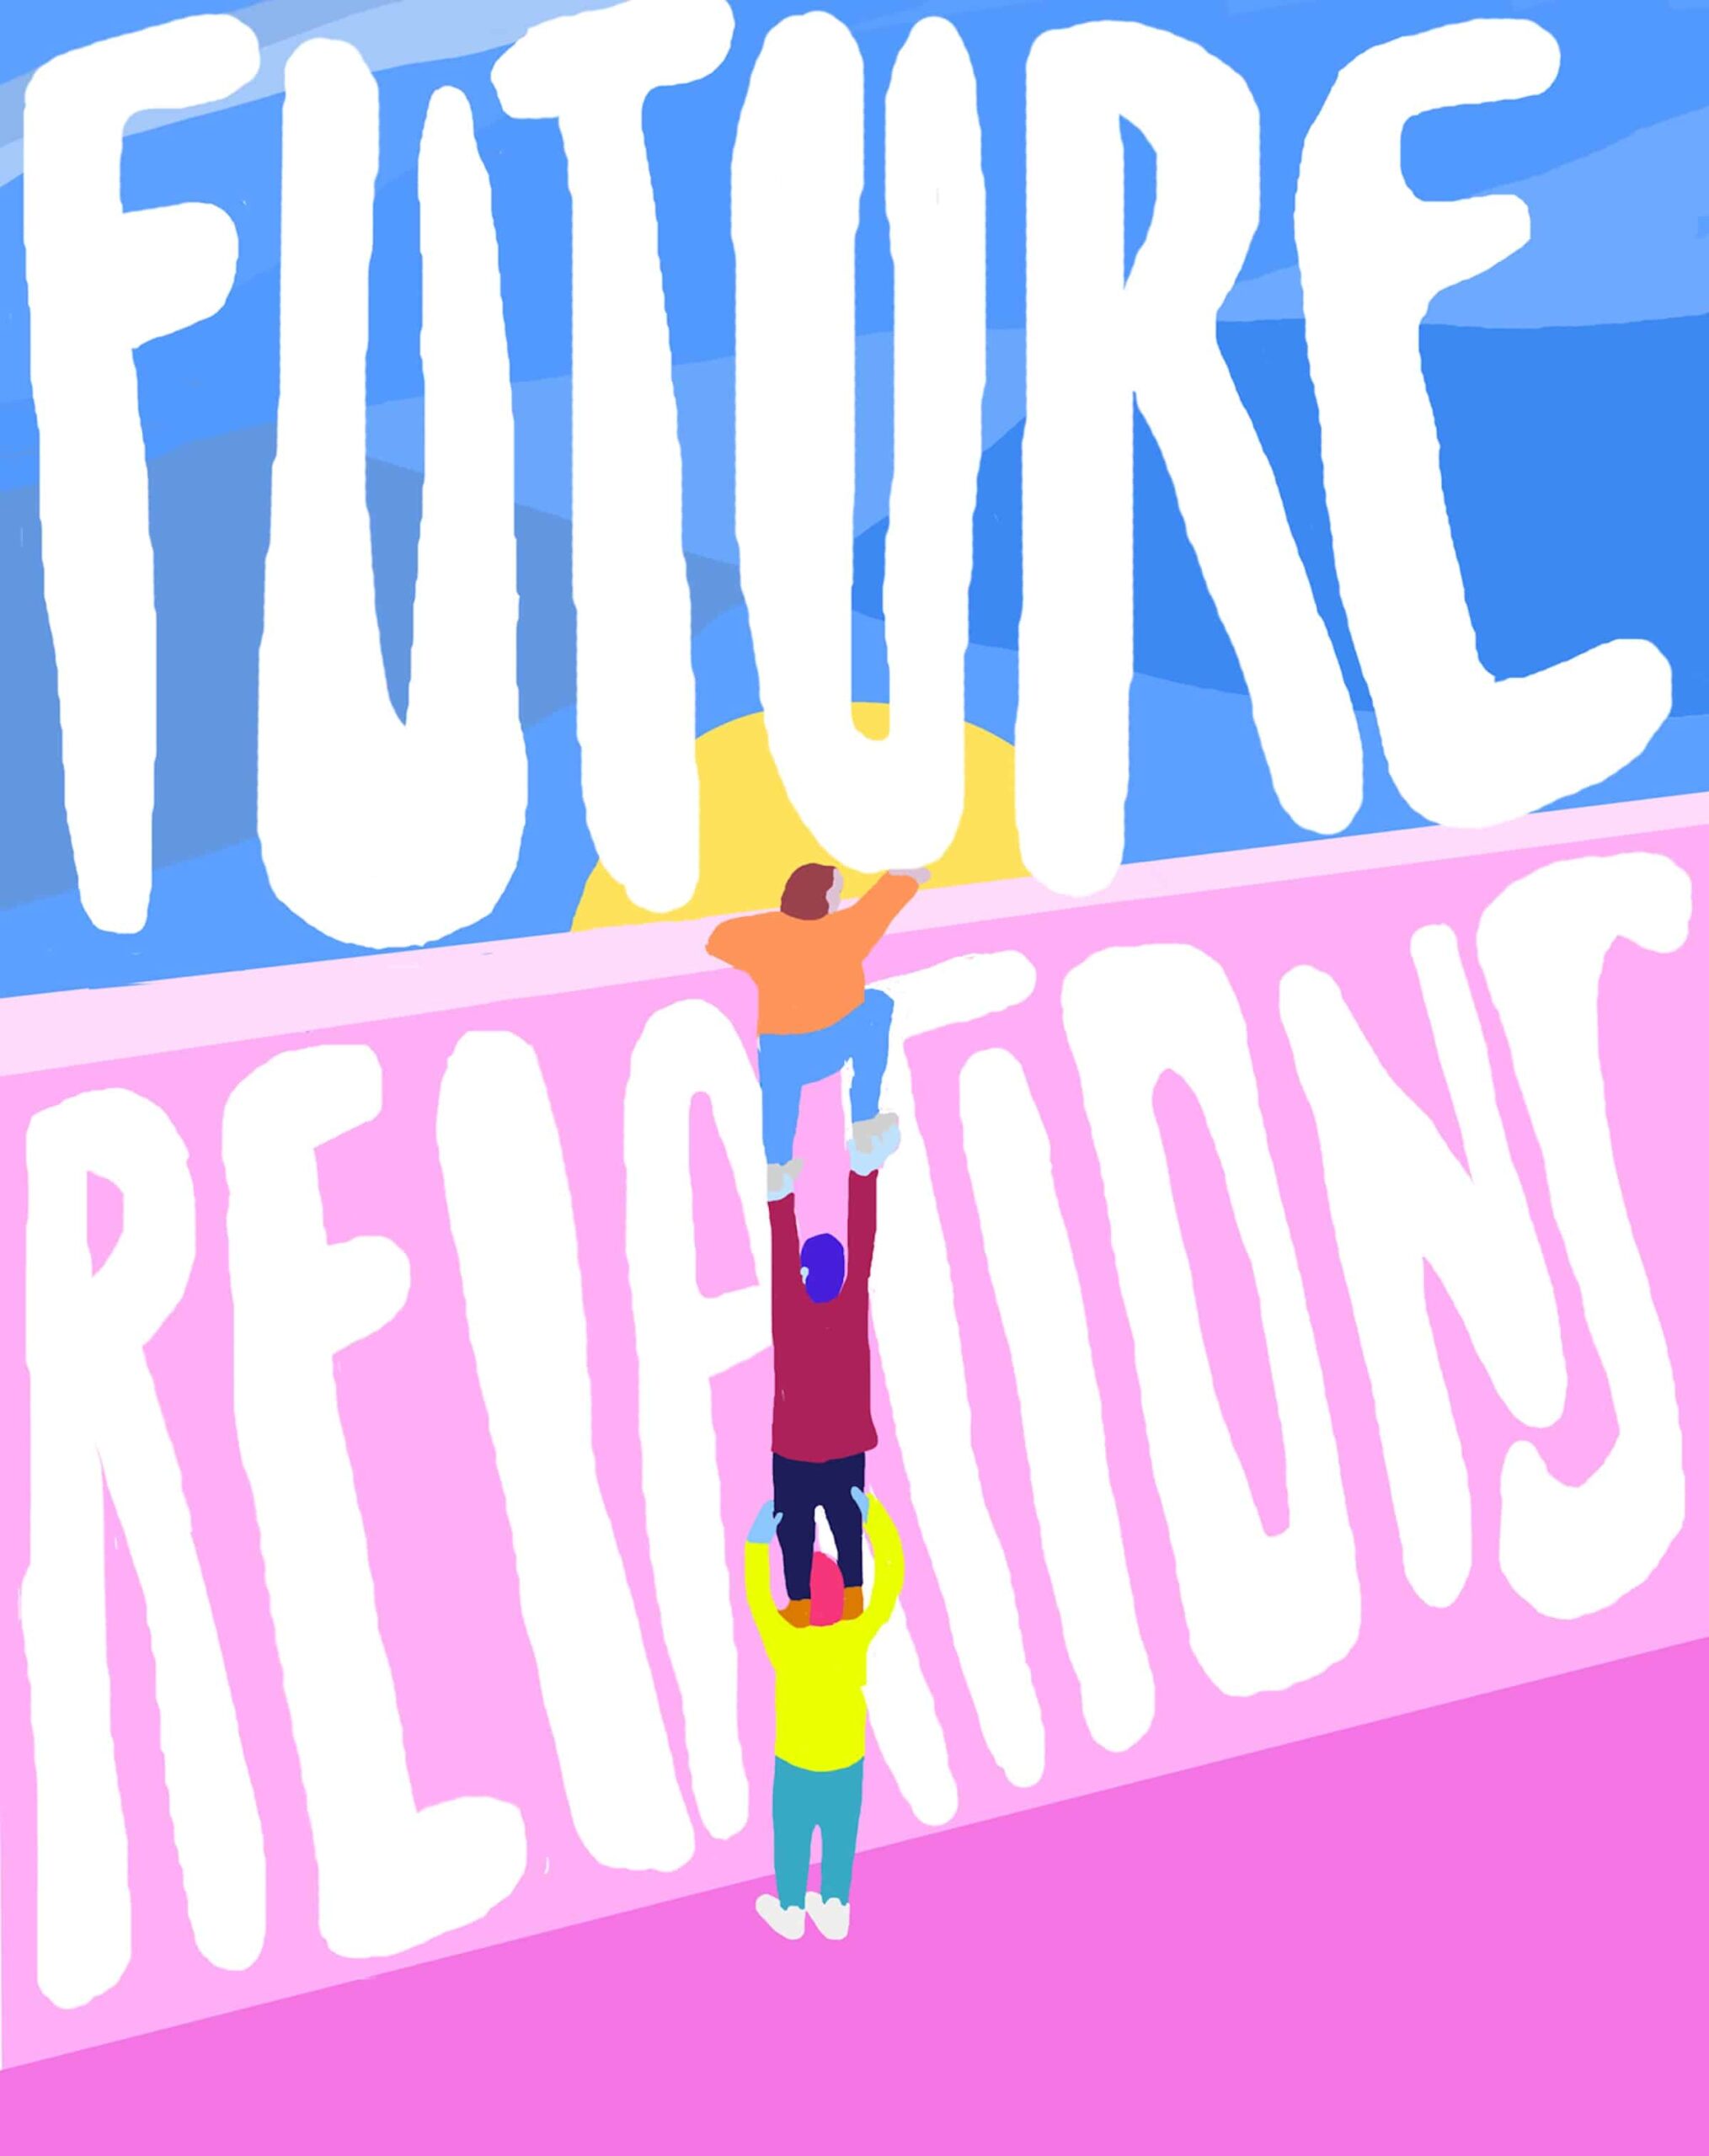 Press Release: Future Relations: A Resource for Radical Teaching presents F.T.P.